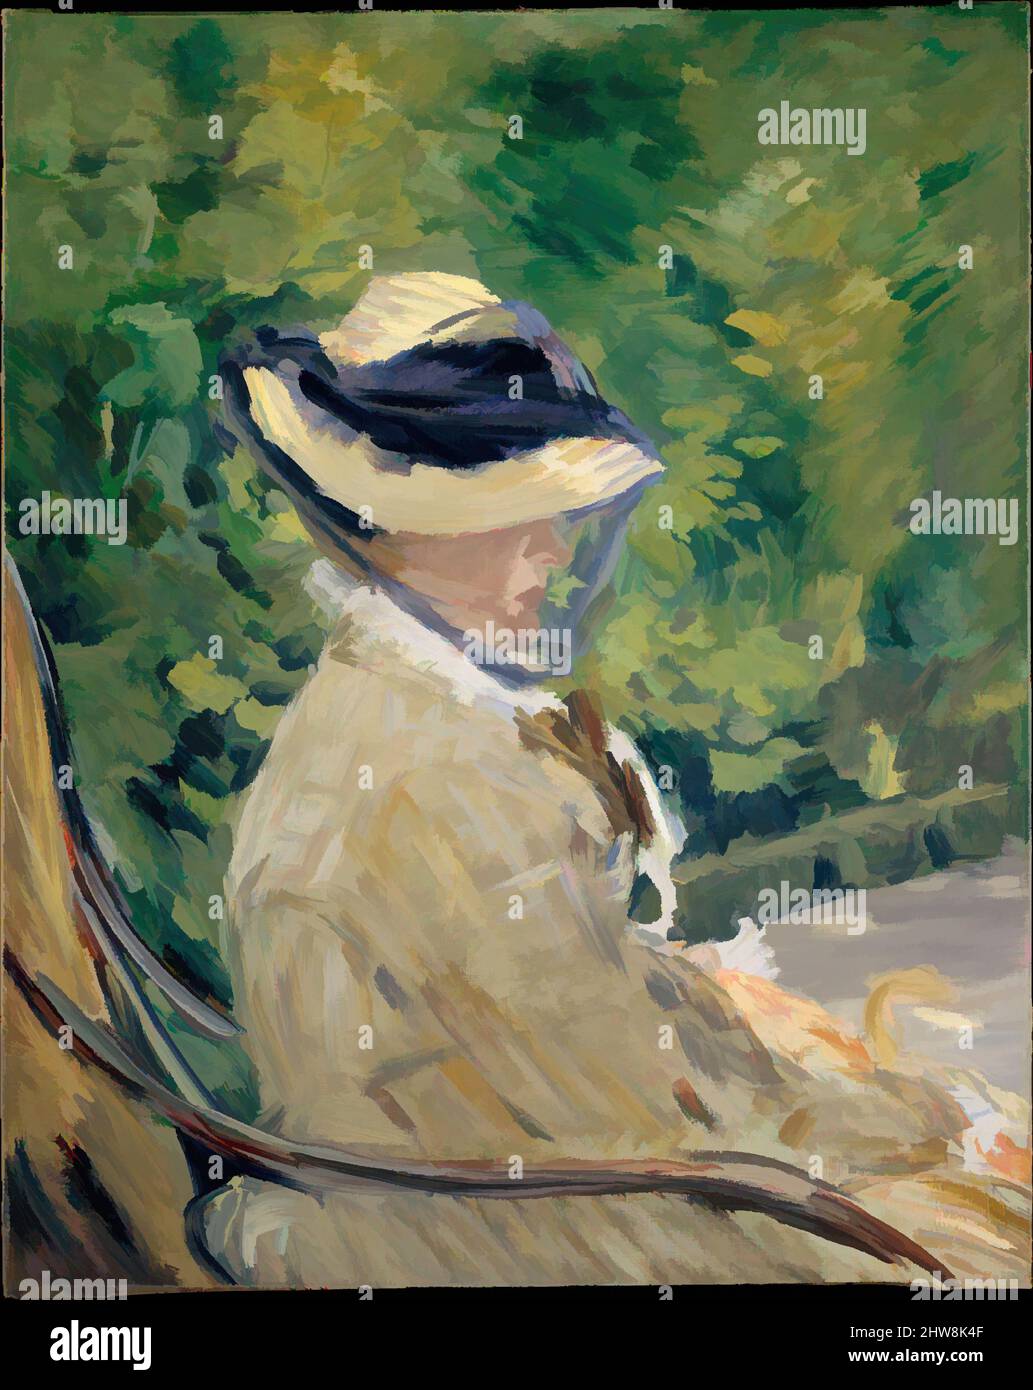 Art inspired by Madame Manet (Suzanne Leenhoff, 1830–1906) at Bellevue, 1880, Oil on canvas, 31 3/4 x 23 3/4 in. (80.6 x 60.3 cm), Paintings, Édouard Manet (French, Paris 1832–1883 Paris), Despite the seemingly rapid brushwork and the summary treatment of detail, this painting was, Classic works modernized by Artotop with a splash of modernity. Shapes, color and value, eye-catching visual impact on art. Emotions through freedom of artworks in a contemporary way. A timeless message pursuing a wildly creative new direction. Artists turning to the digital medium and creating the Artotop NFT Stock Photo